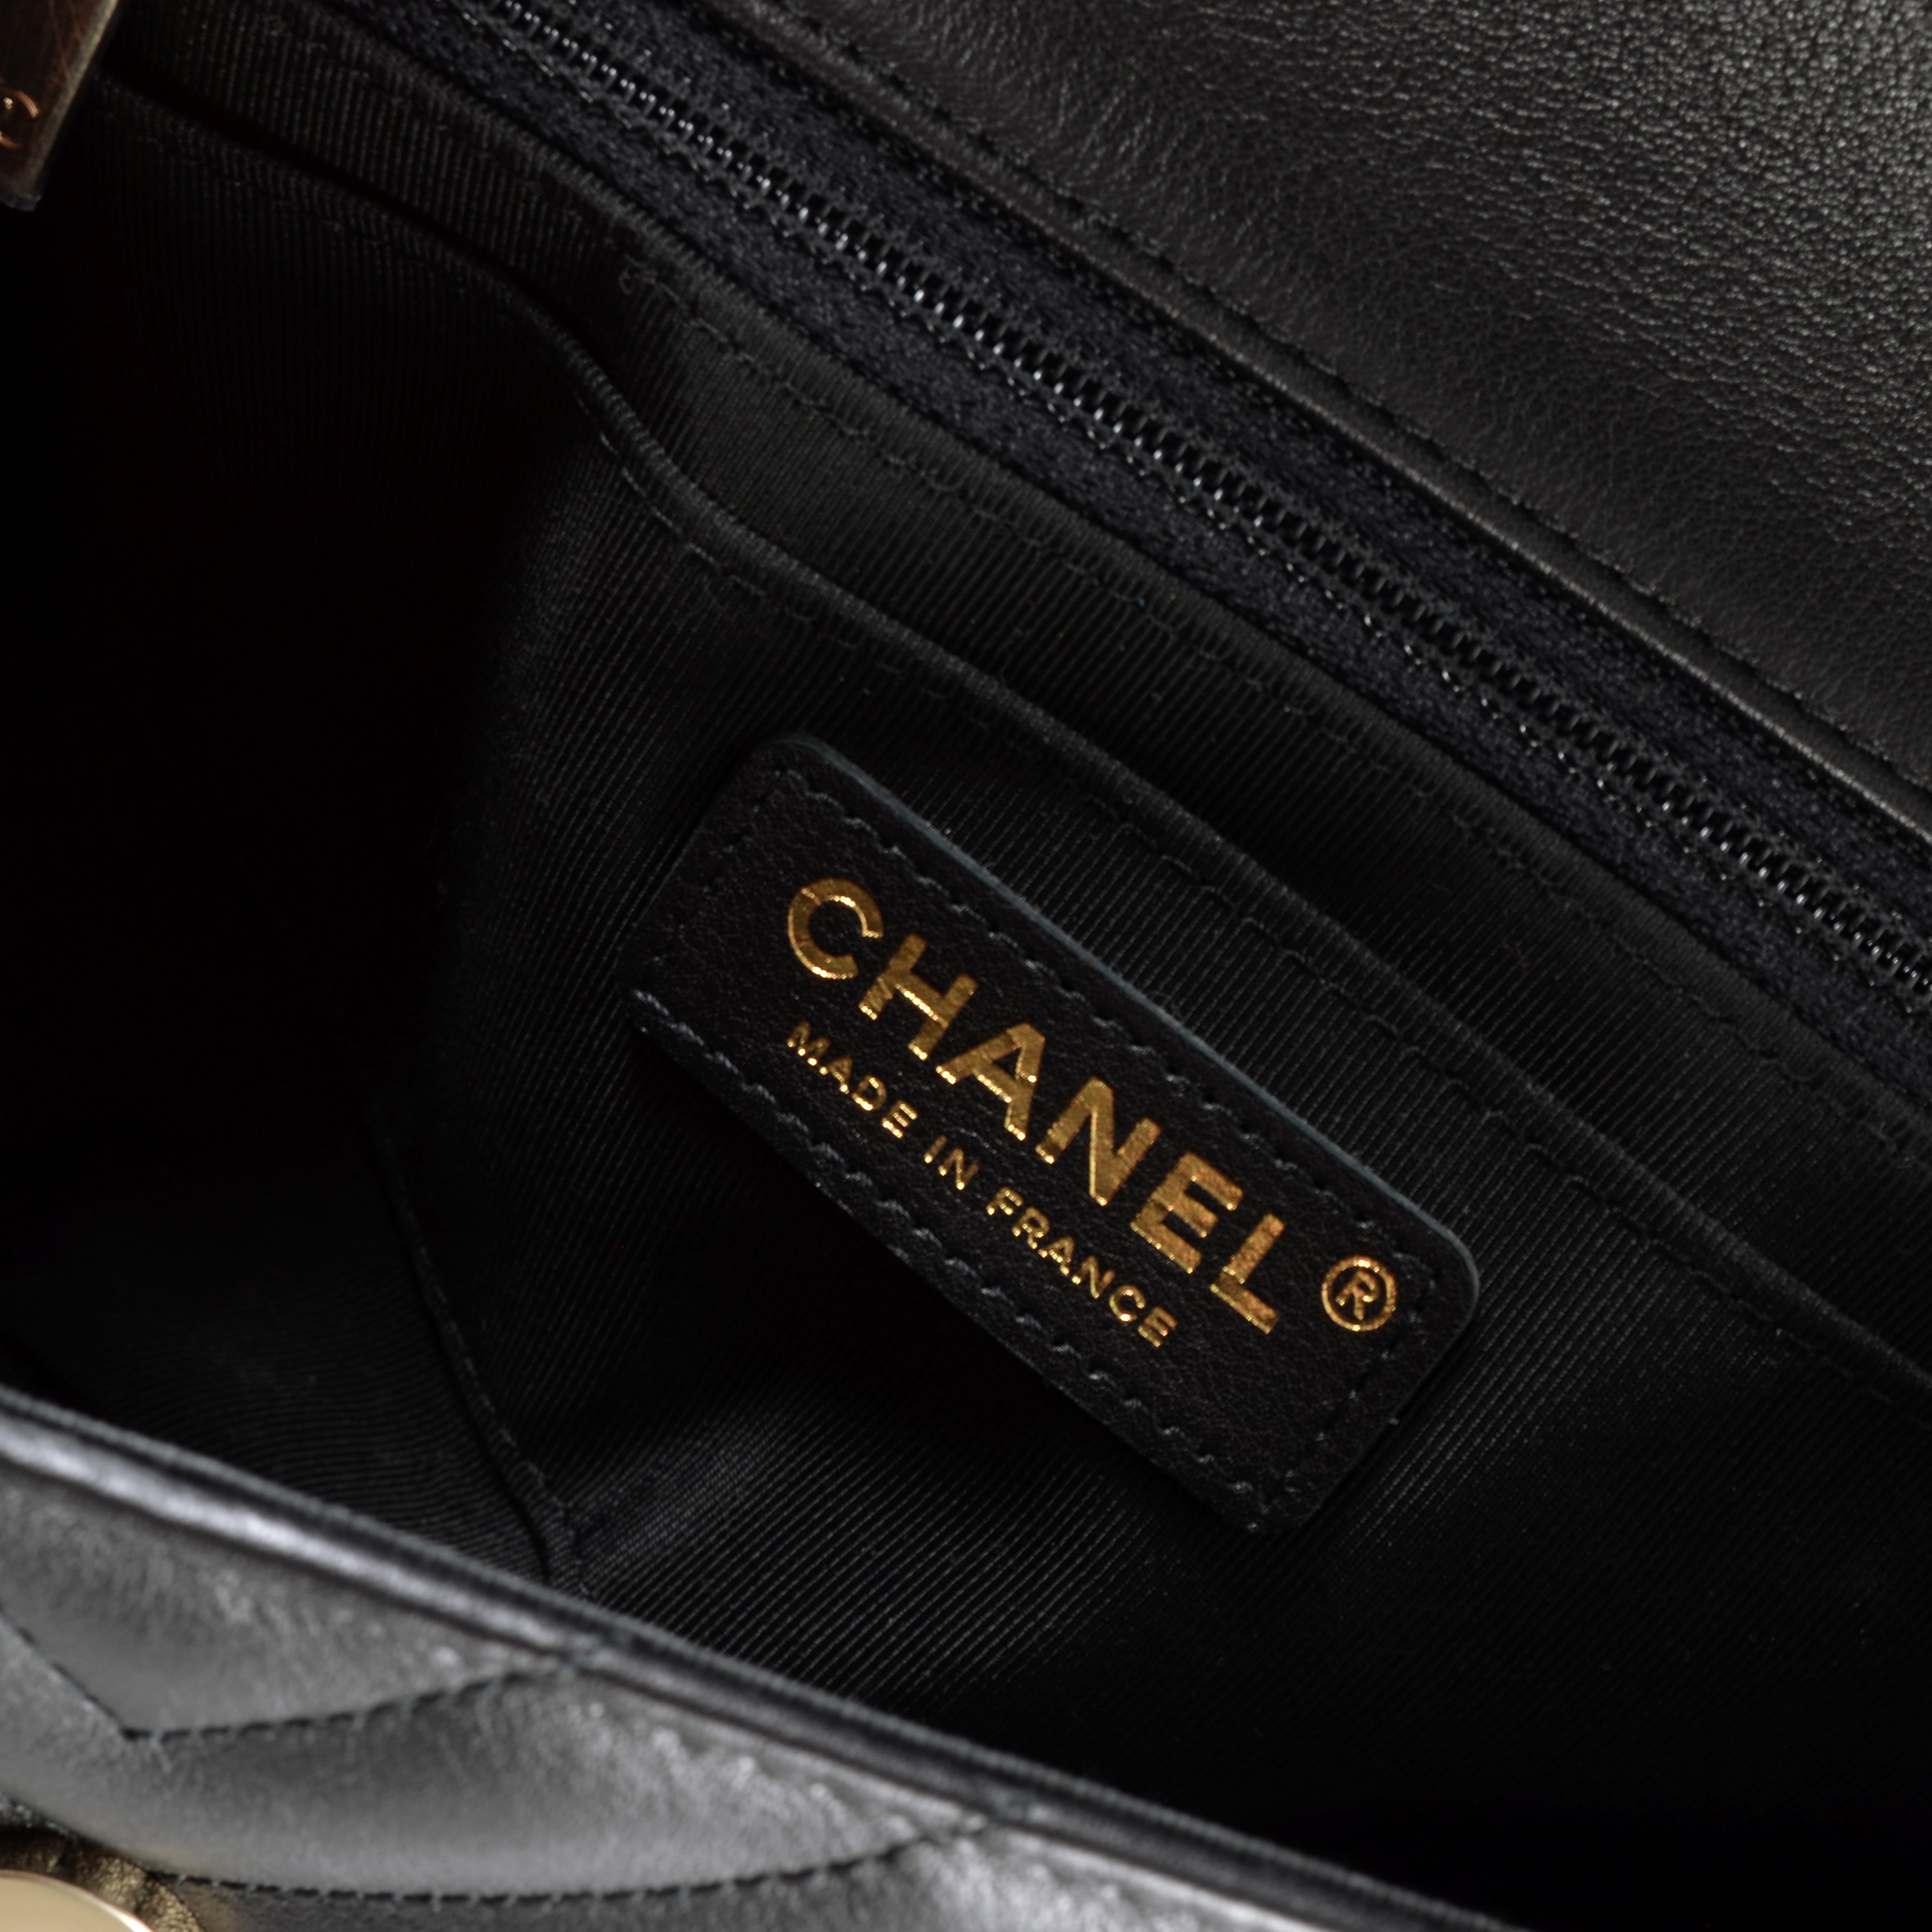 chanel distressed leather bag